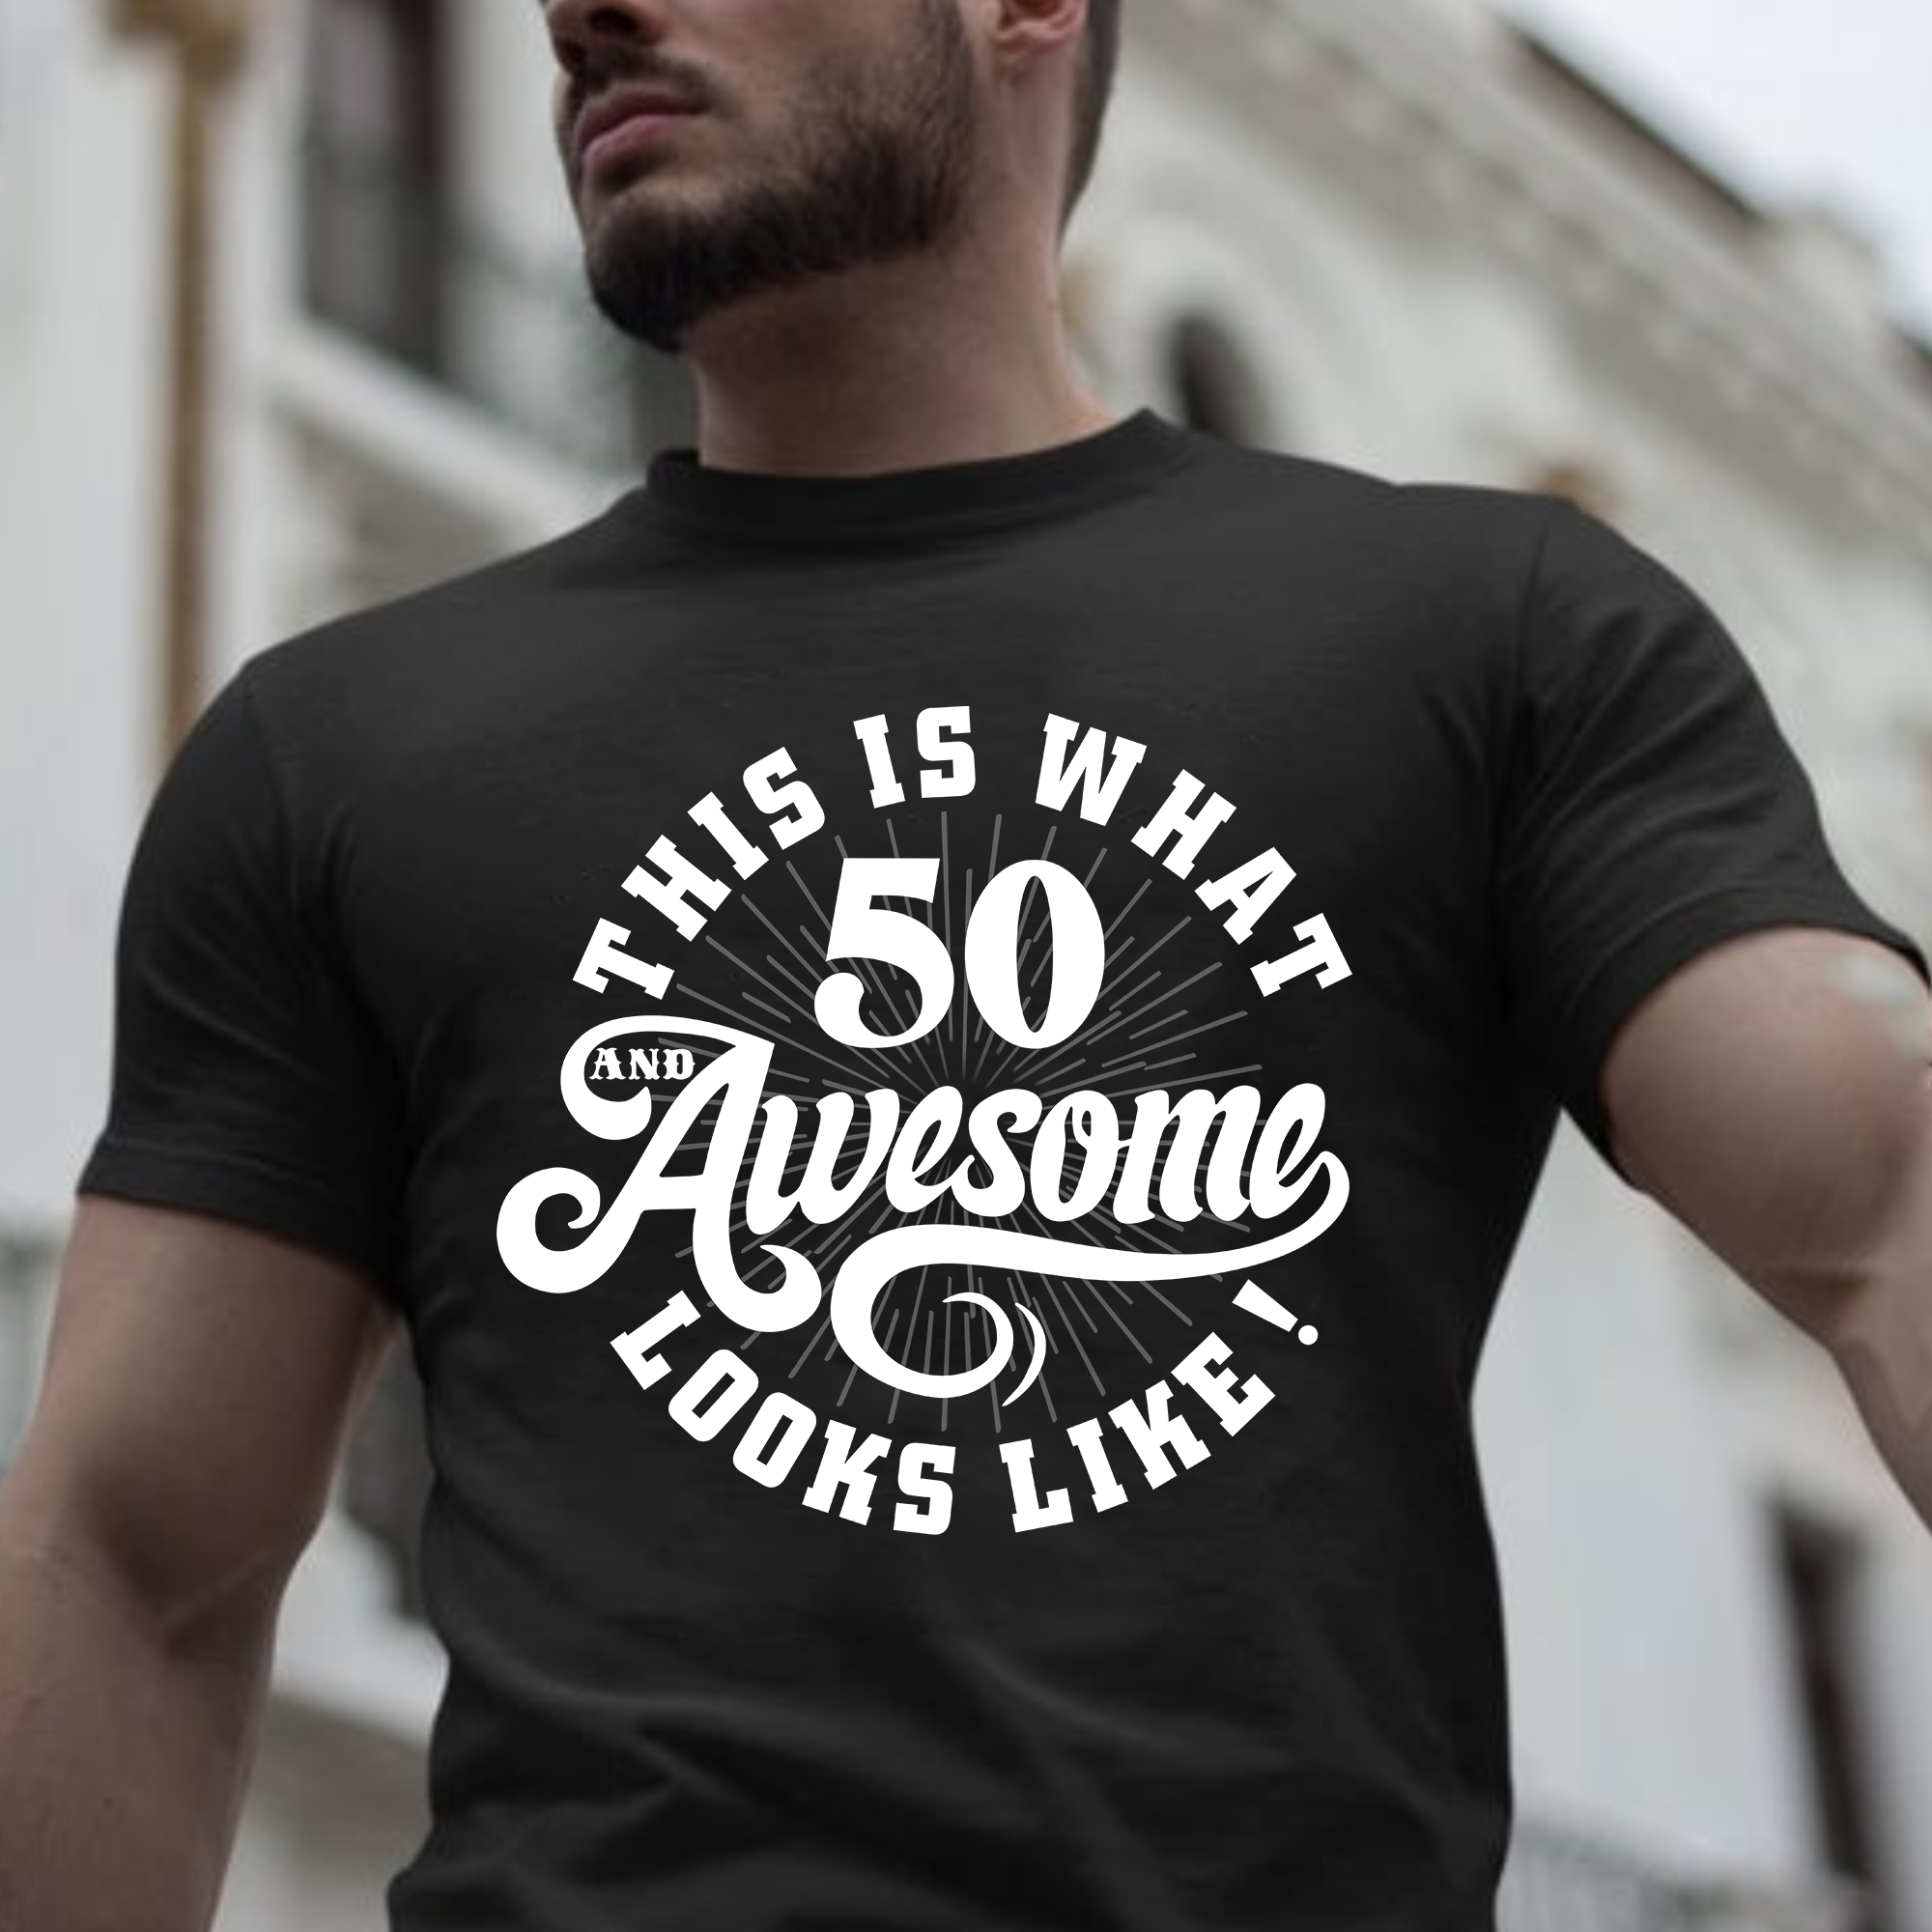 This Is What 50 Awesome Looks Like – Happy 50th Birthday Shirt